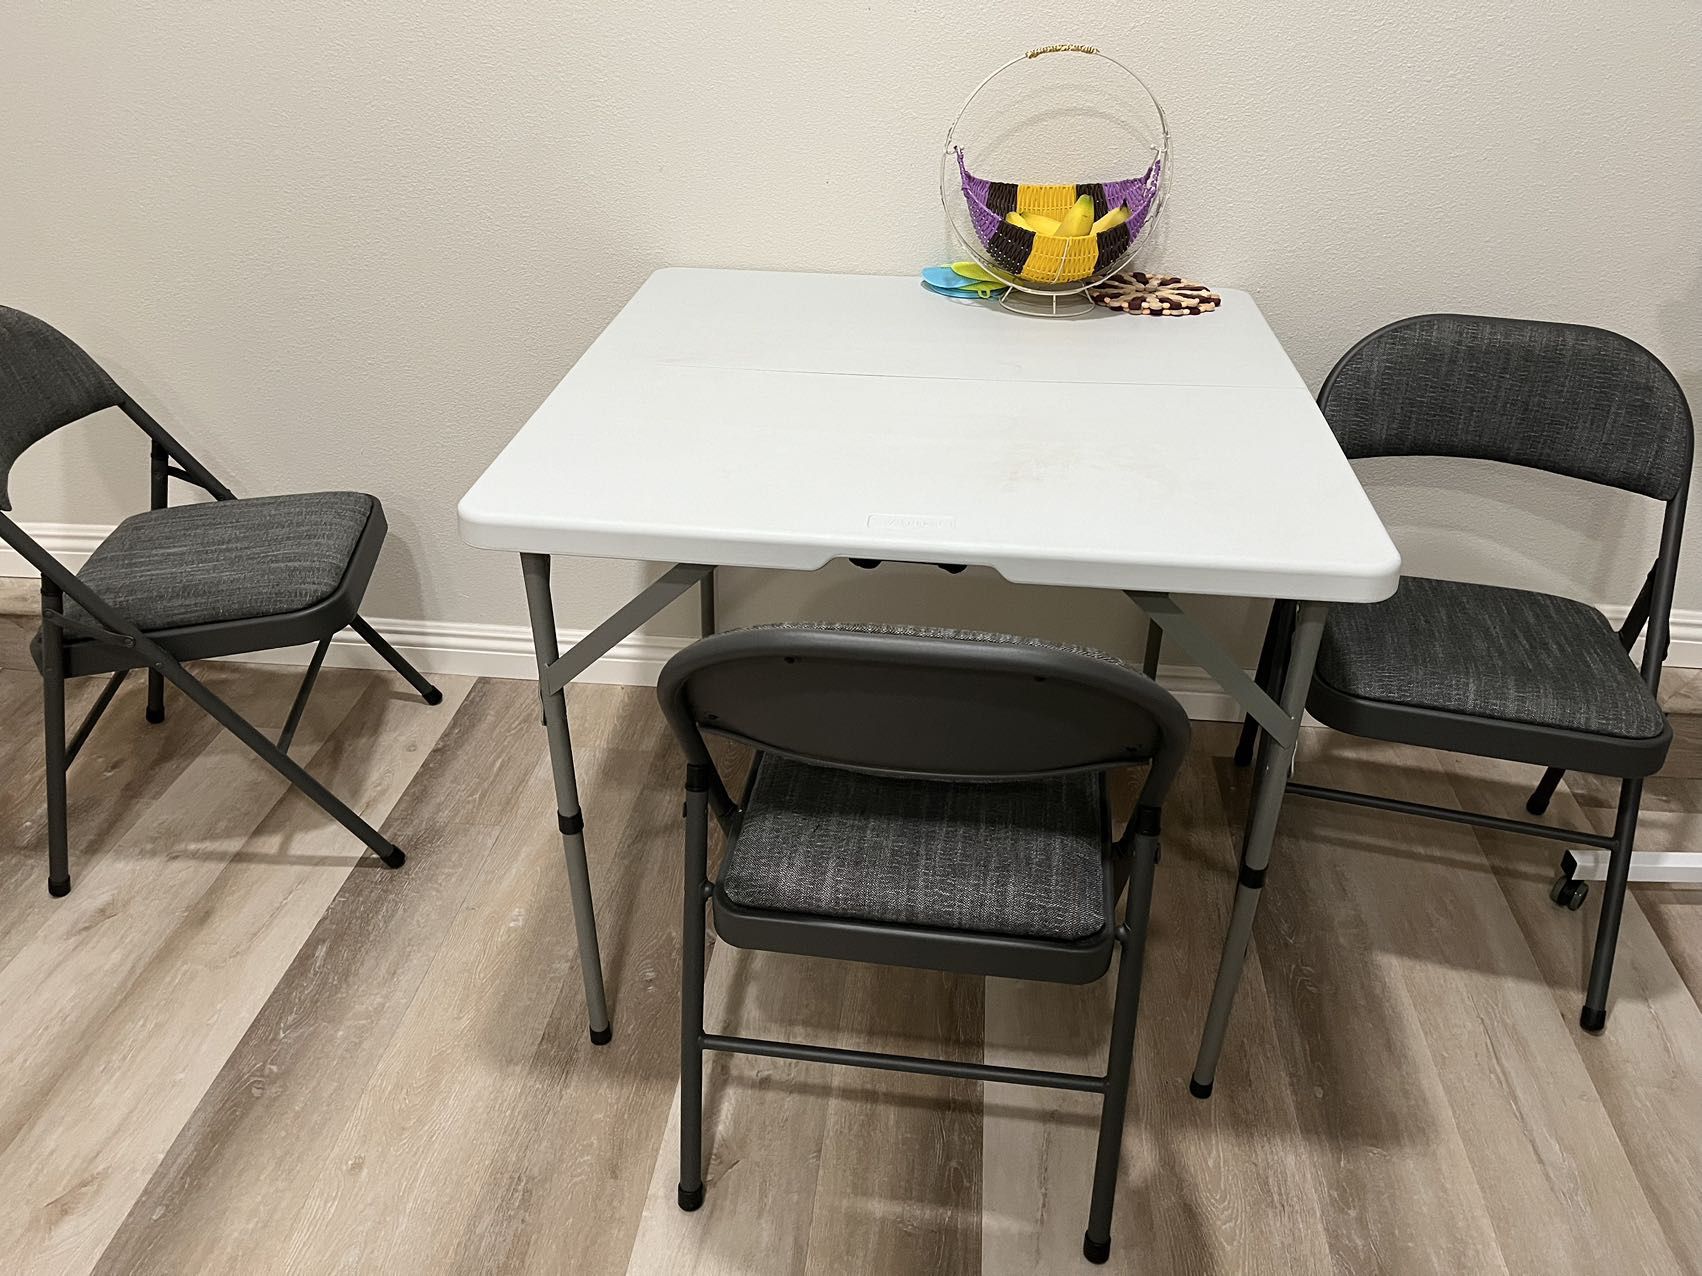 Foldable White Table $20 Chairs $15 each